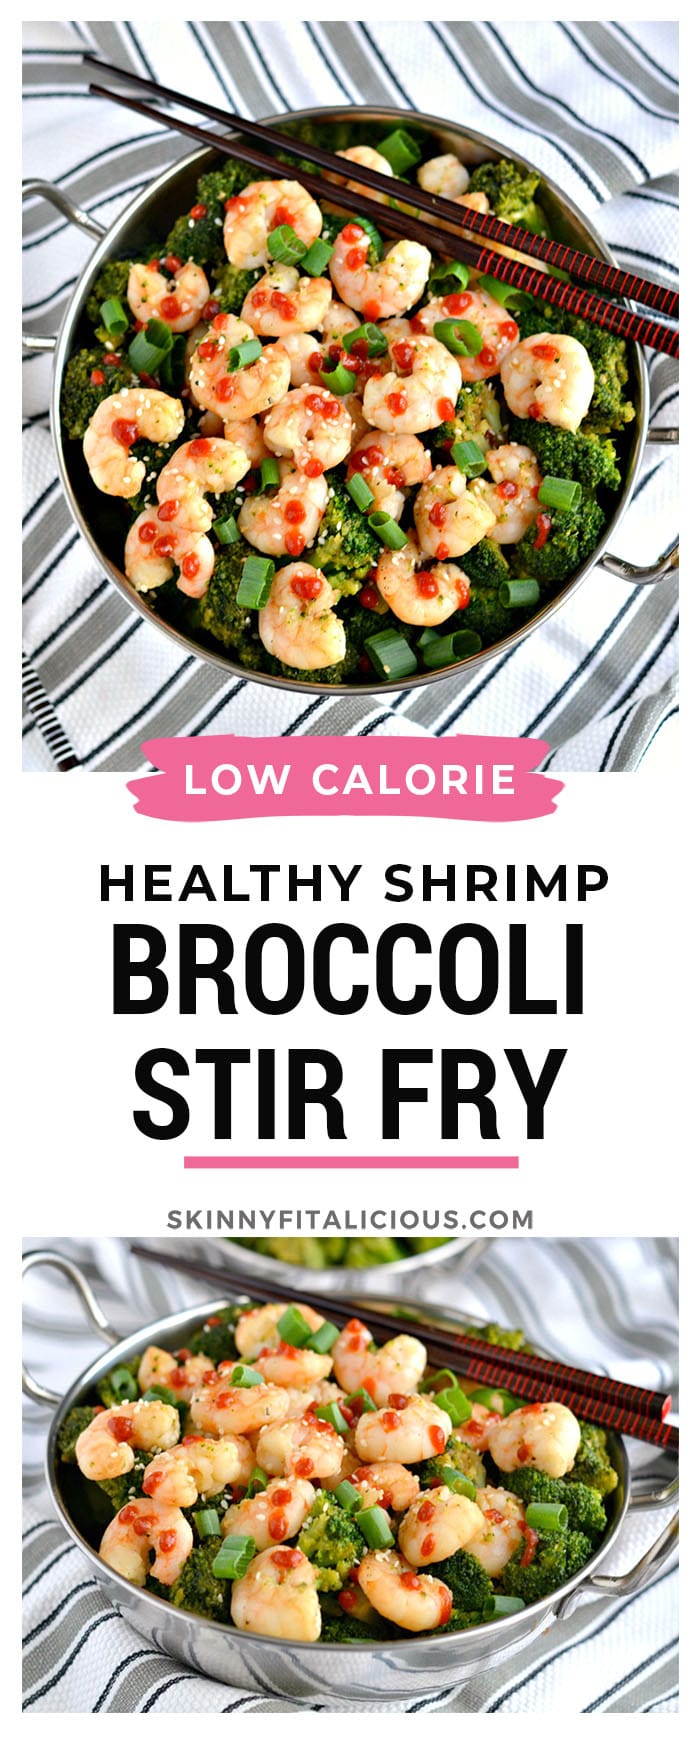 Shrimp & Broccoli Stir Fry is a quick, easy and healthy dinner you can make in under 20 minutes that's only 241 calories. A mouthwatering, one skillet meal great for a busy day! Gluten Free + Low Calorie